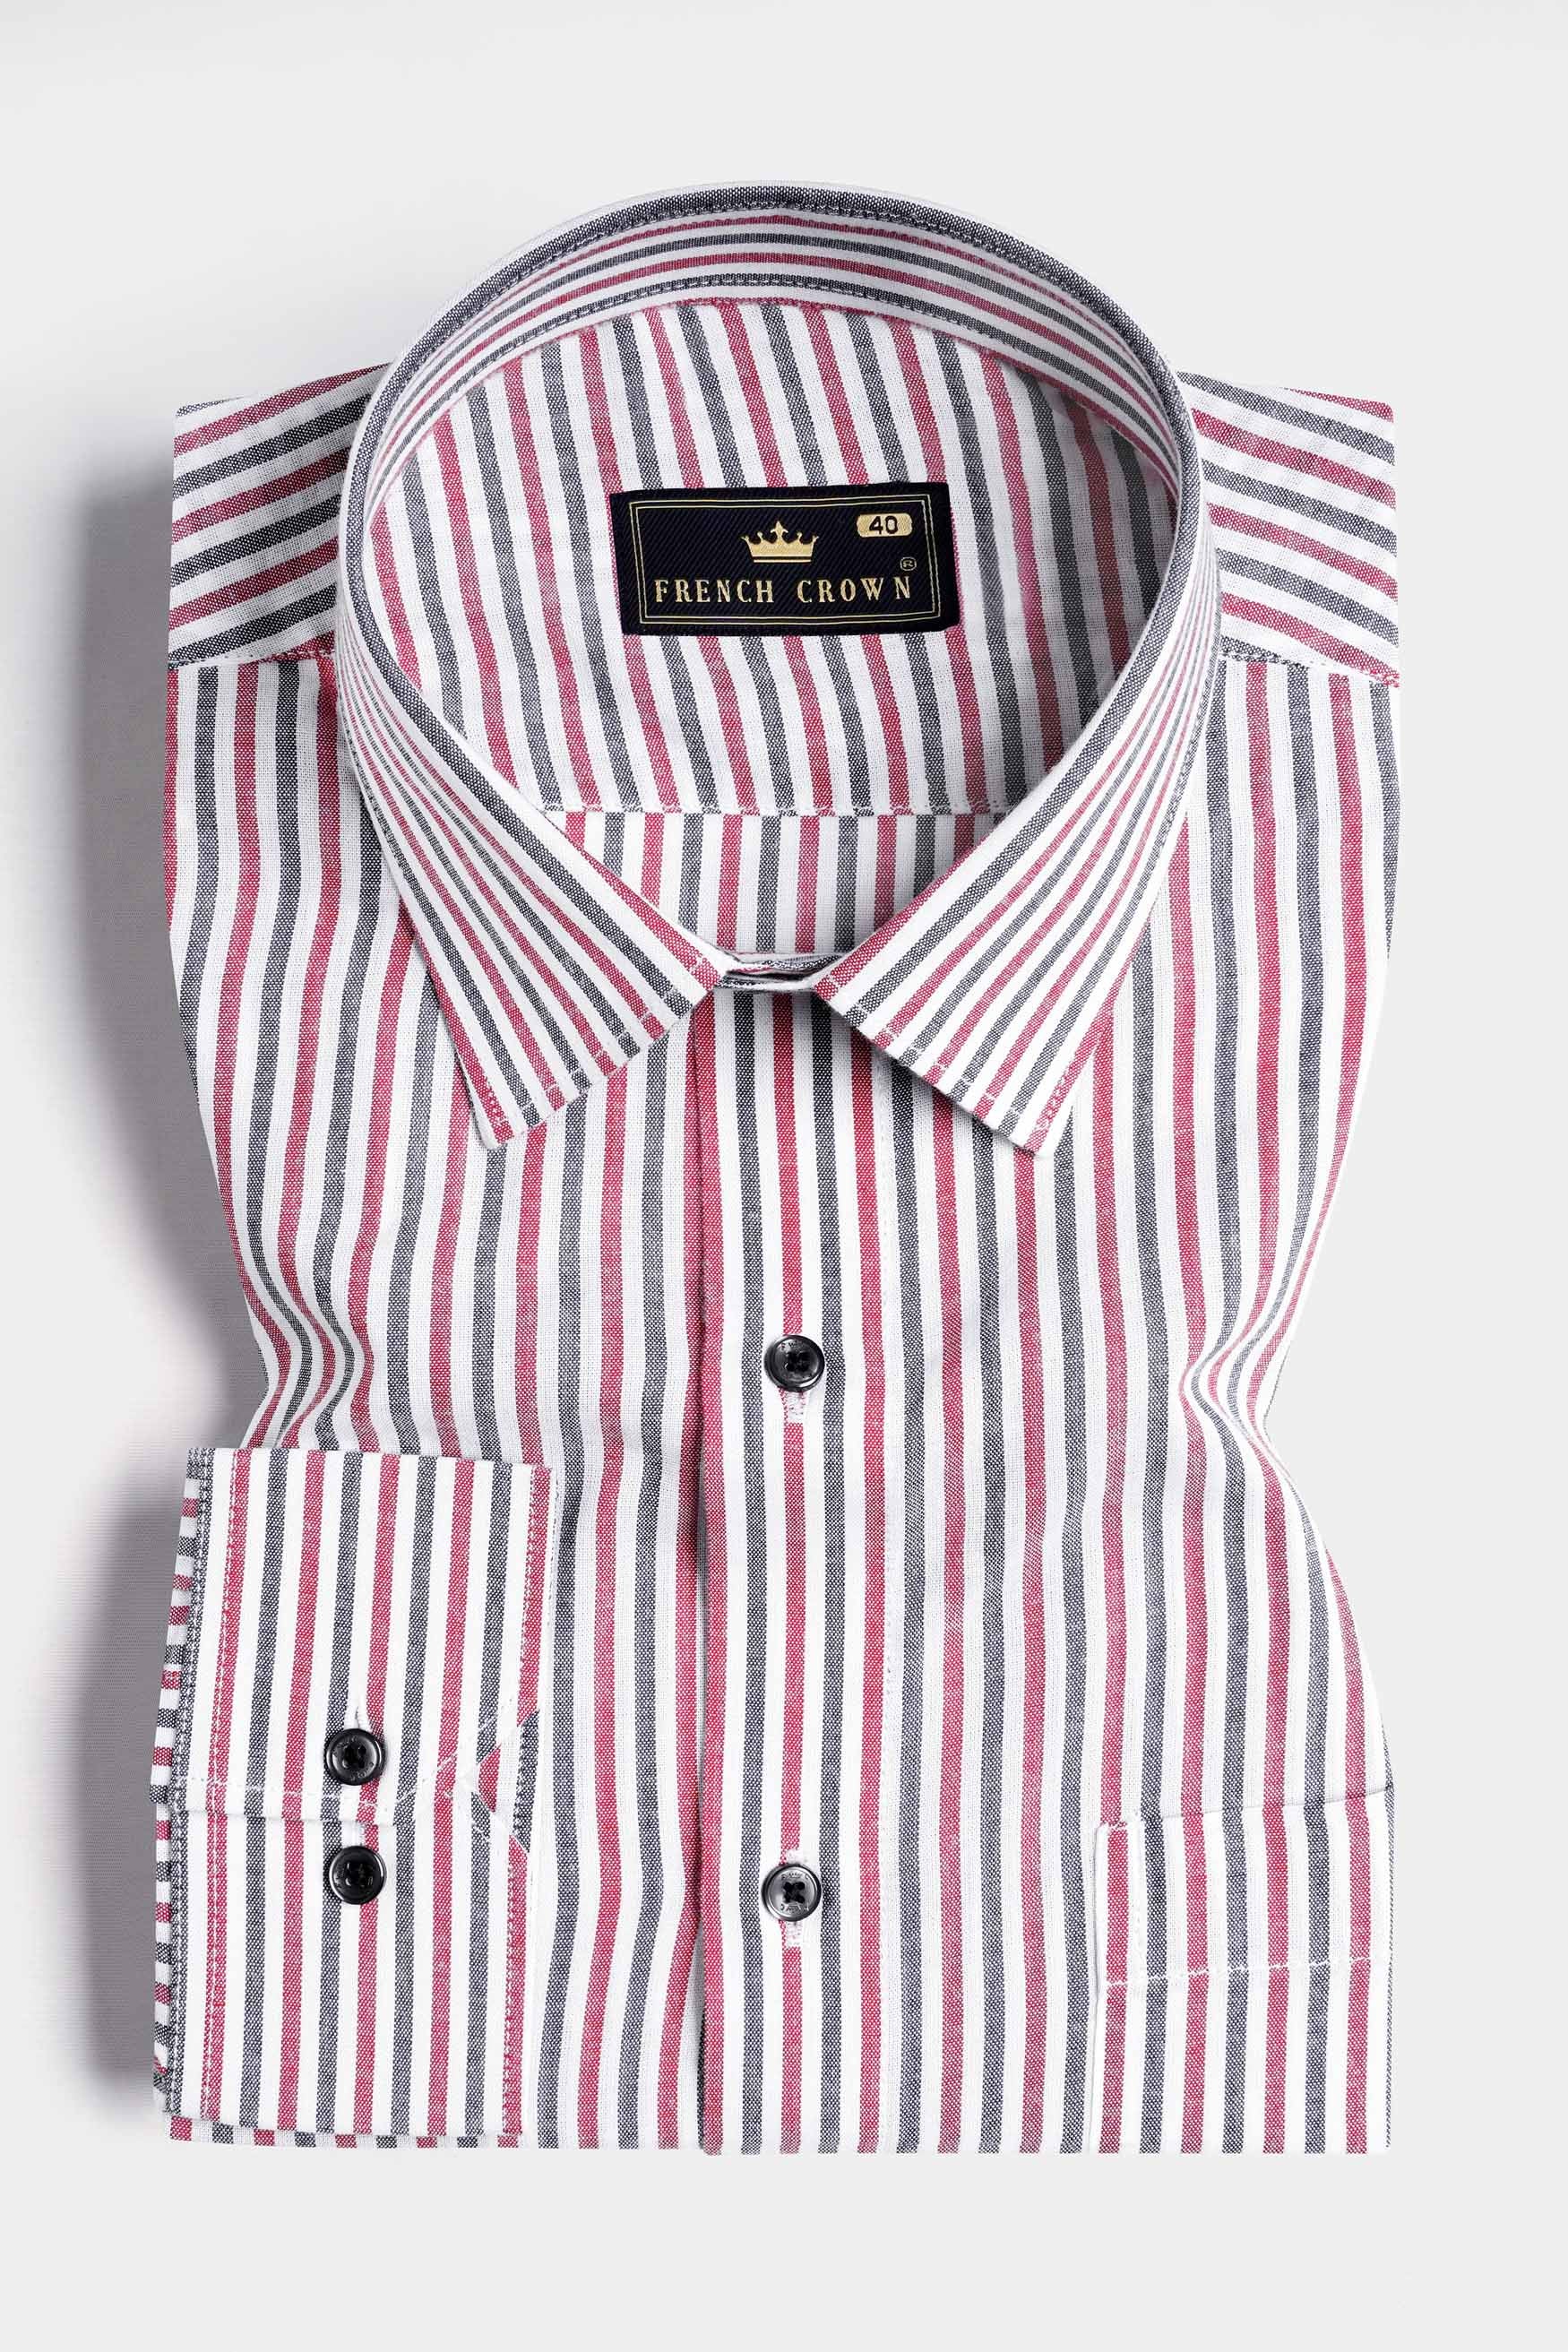 Bright White with Mandy Pink and Boulder Gray Striped Royal Oxford Shirt 11582-BLK-38, 11582-BLK-H-38, 11582-BLK-39, 11582-BLK-H-39, 11582-BLK-40, 11582-BLK-H-40, 11582-BLK-42, 11582-BLK-H-42, 11582-BLK-44, 11582-BLK-H-44, 11582-BLK-46, 11582-BLK-H-46, 11582-BLK-48, 11582-BLK-H-48, 11582-BLK-50, 11582-BLK-H-50, 11582-BLK-52, 11582-BLK-H-52